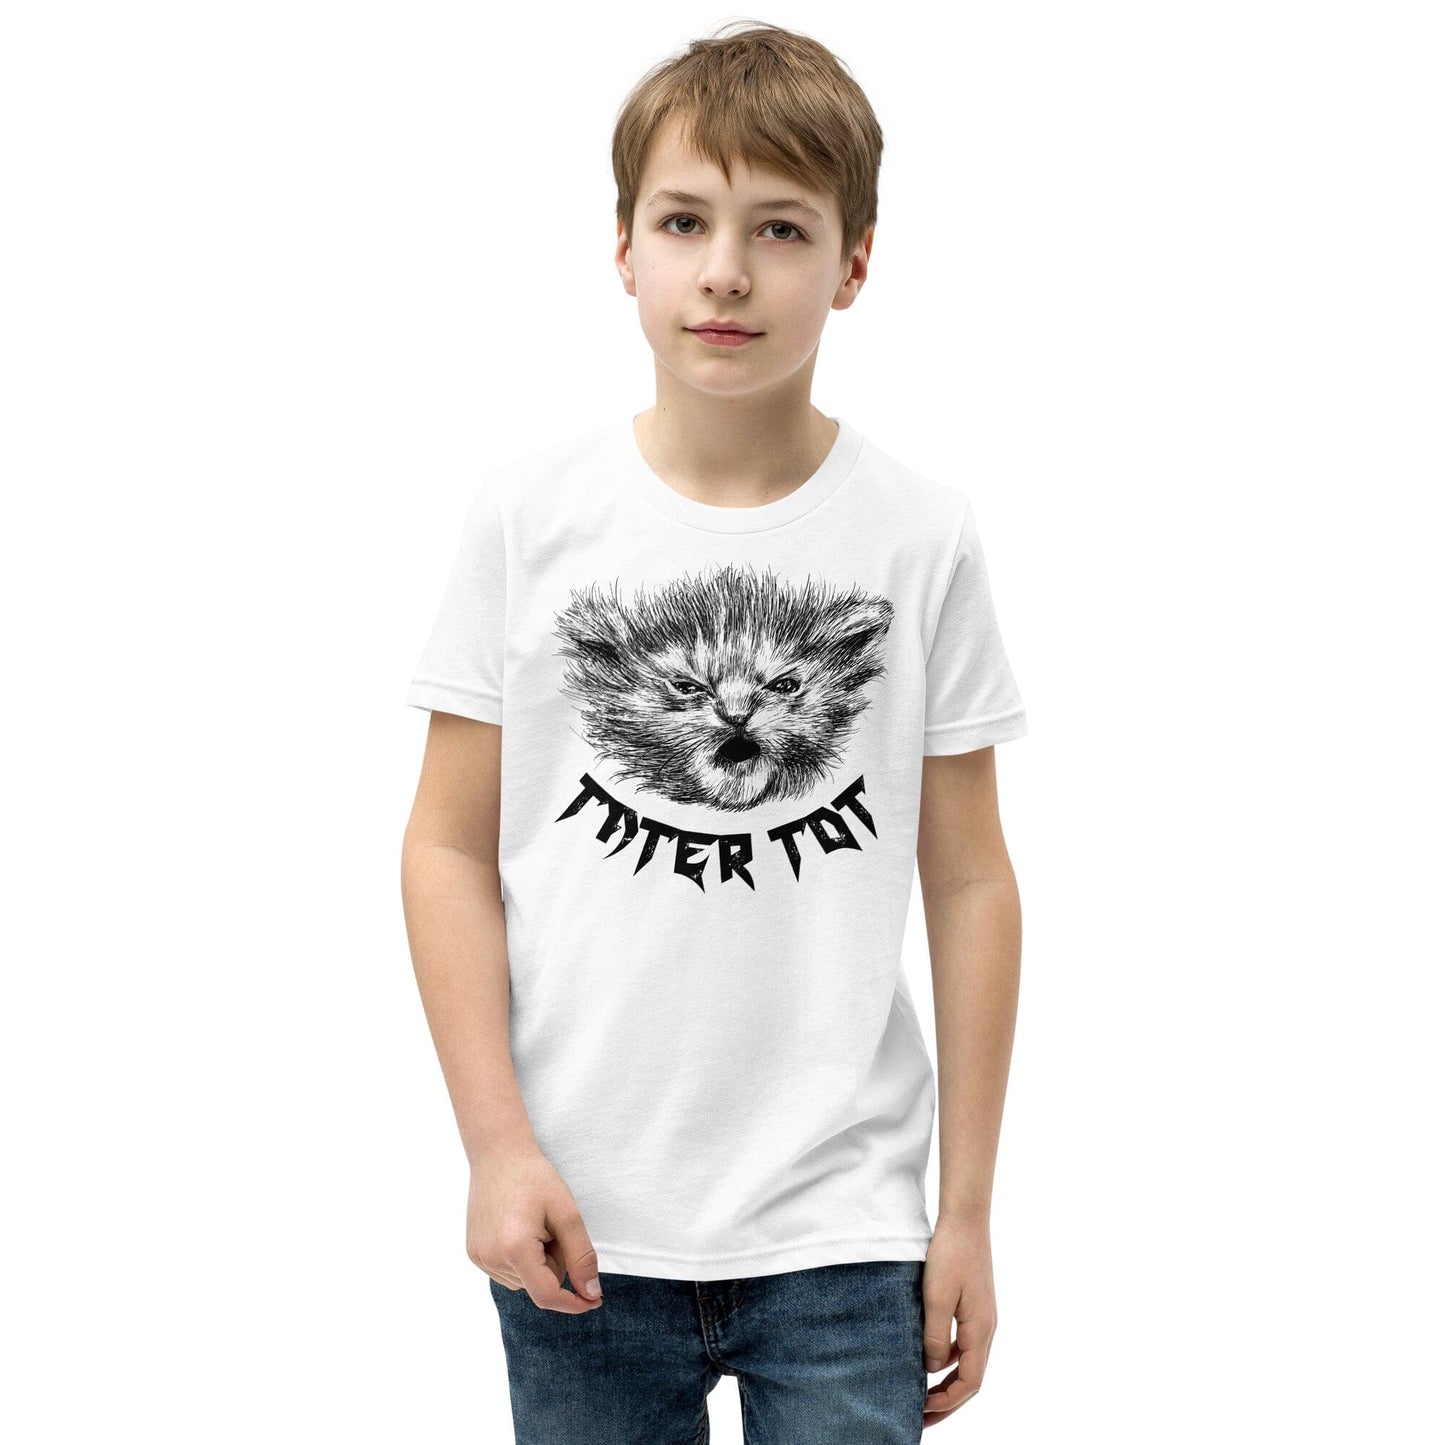 Metal Tater Tot YOUTH T-Shirt [Unfoiled] (All net proceeds go to Kitty CrusAIDe) JoyousJoyfulJoyness White S 